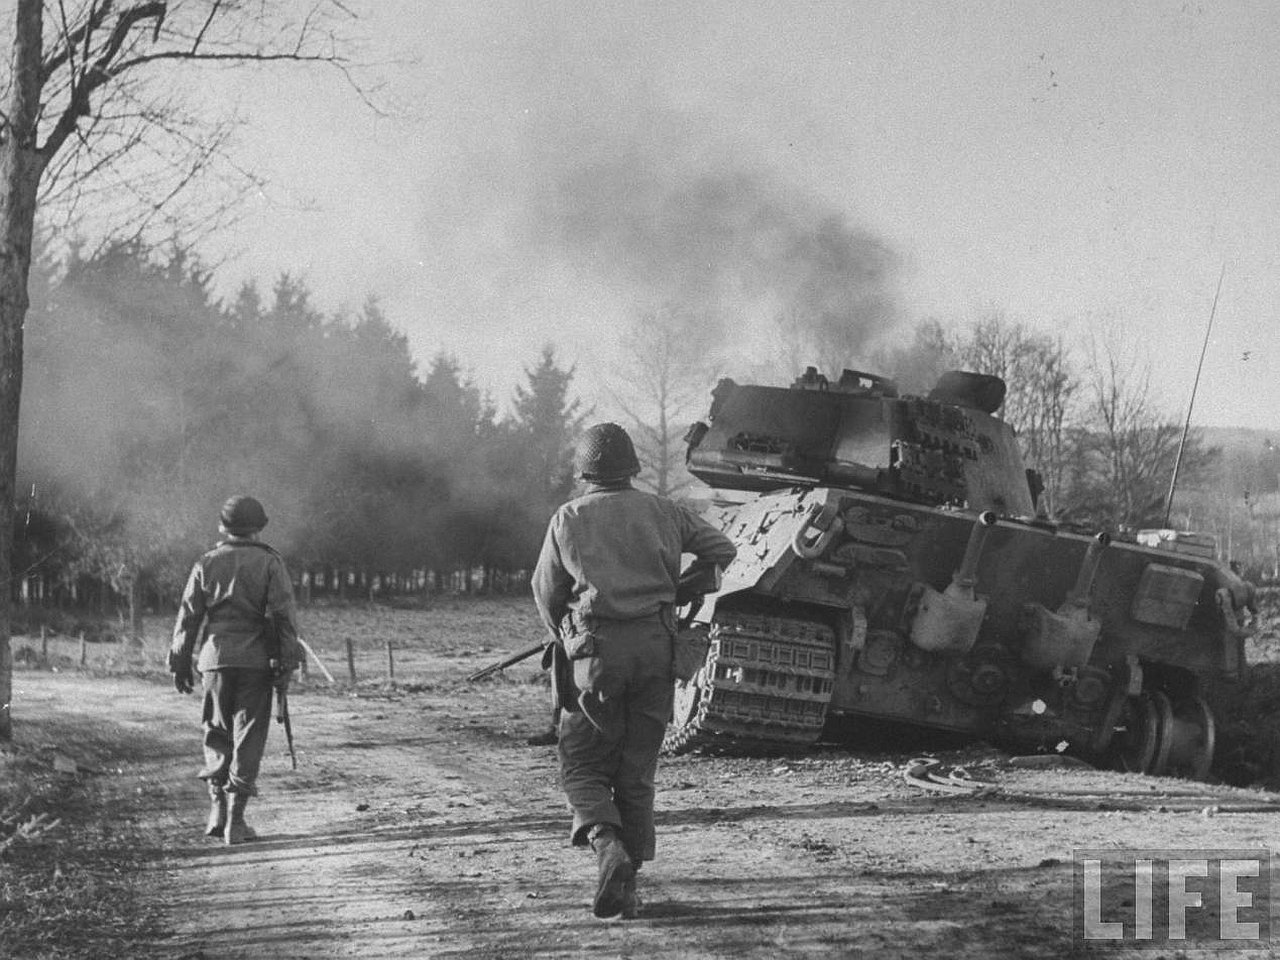 what tanks were used in the movie battle of the bulge